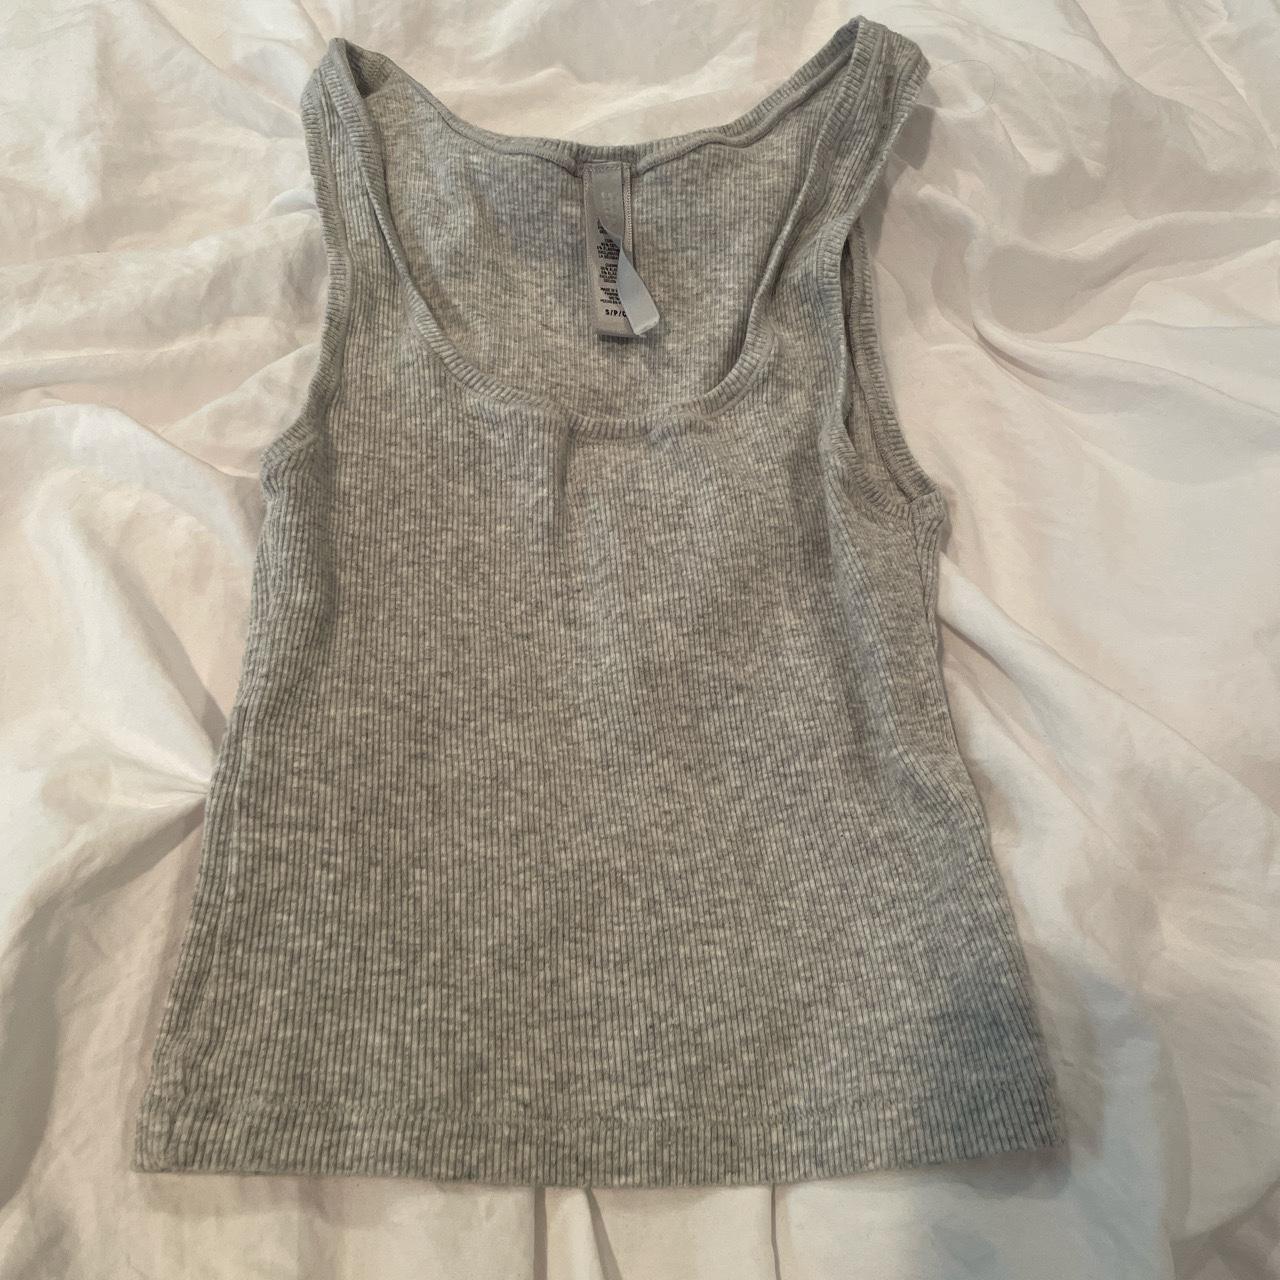 skims size small light gray cropped tank top great... - Depop